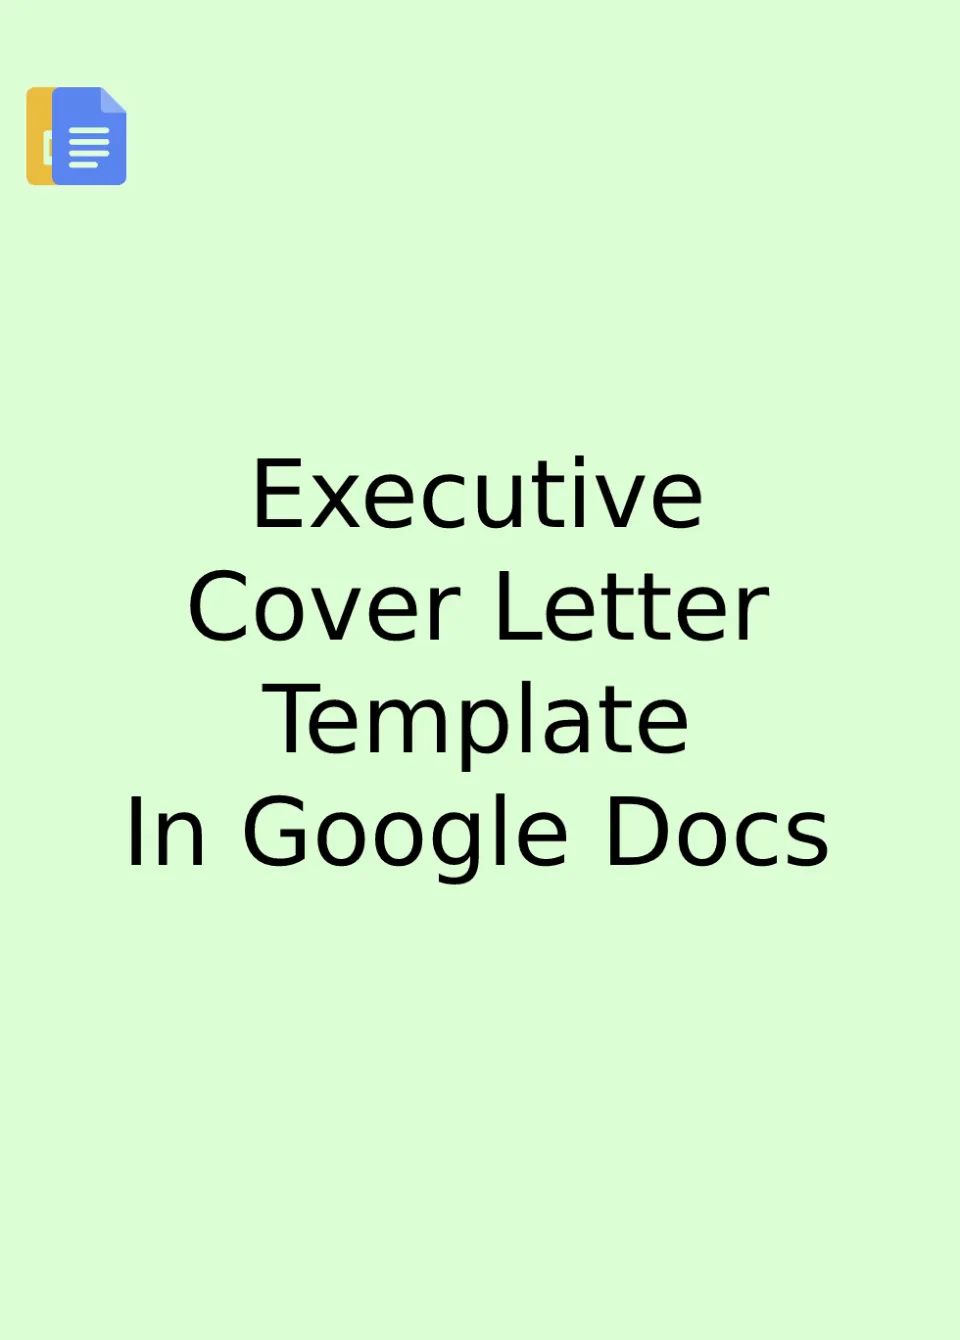 Executive Cover Letter Template Google Docs